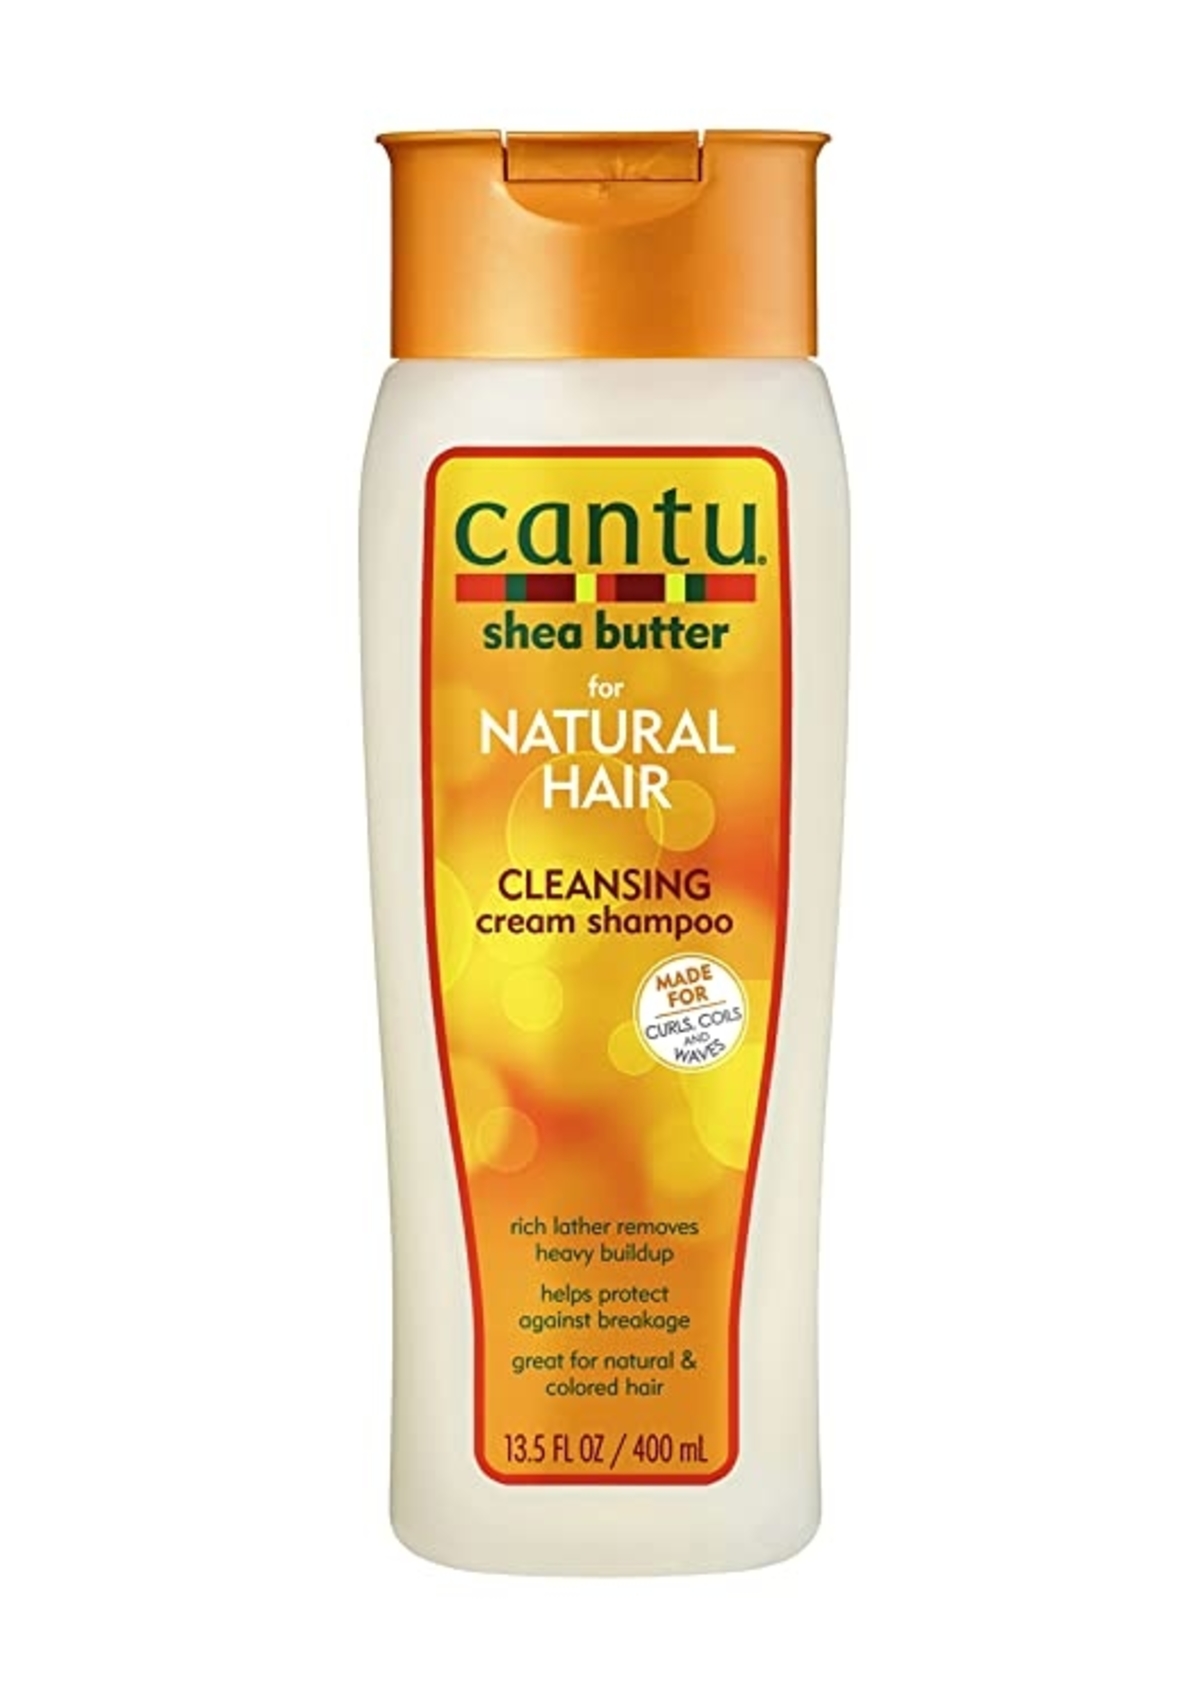 Cantu Shea Butter For Natural Hair Sulfate Free Cleansing Cream Shampoo, 13.5 Ounce